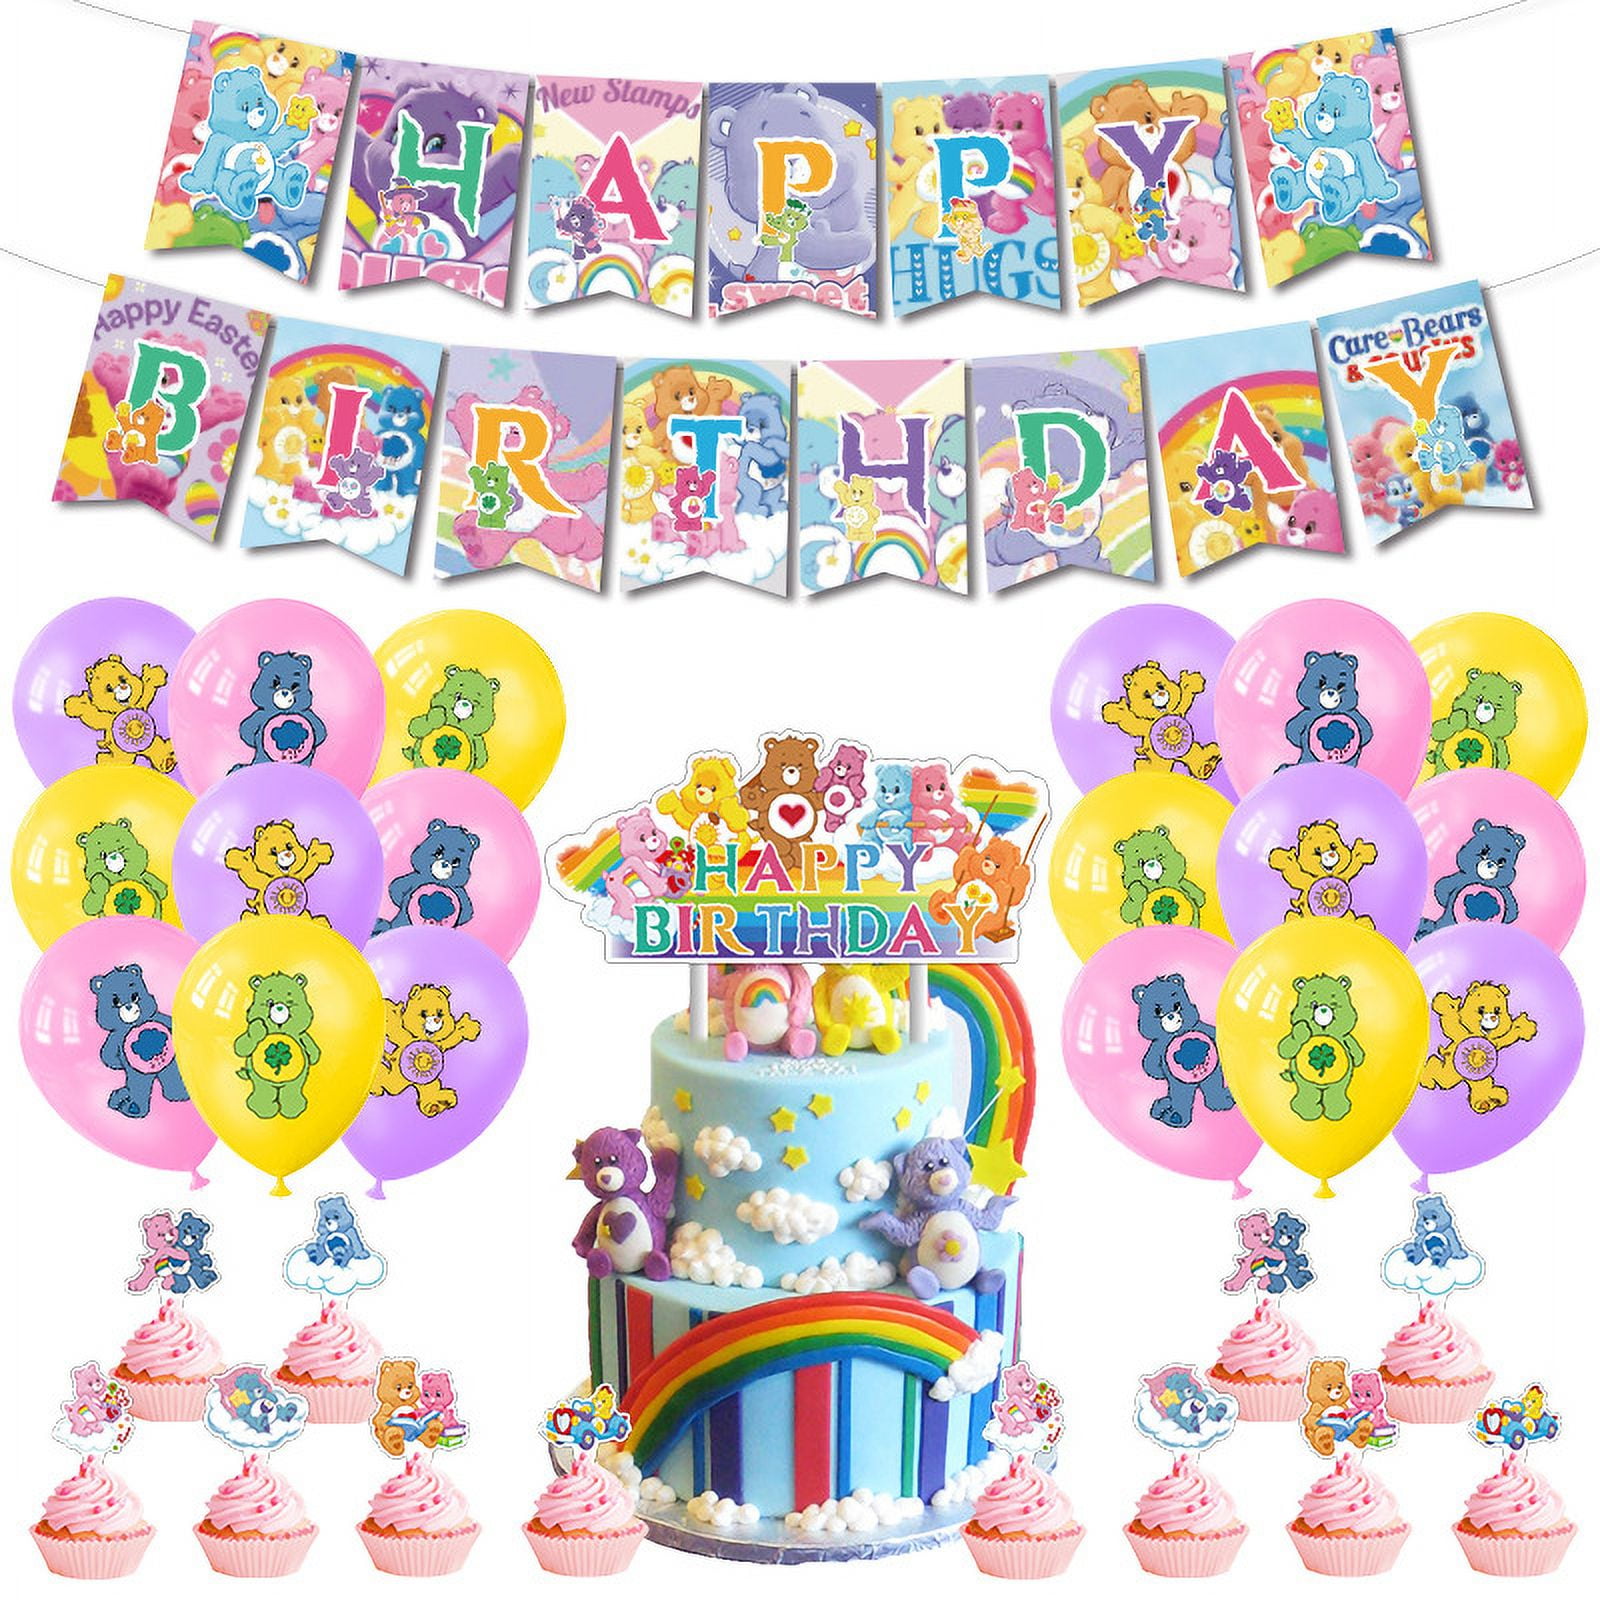  50 pcs Care cute Bears Party Decorations Party Favors Includes  Happy Birthday Banner,Cake Topper,Cupcake Toppers,Hanging Swirl,Balloons  Birthday Party Decorations Favors for Kids : Toys & Games